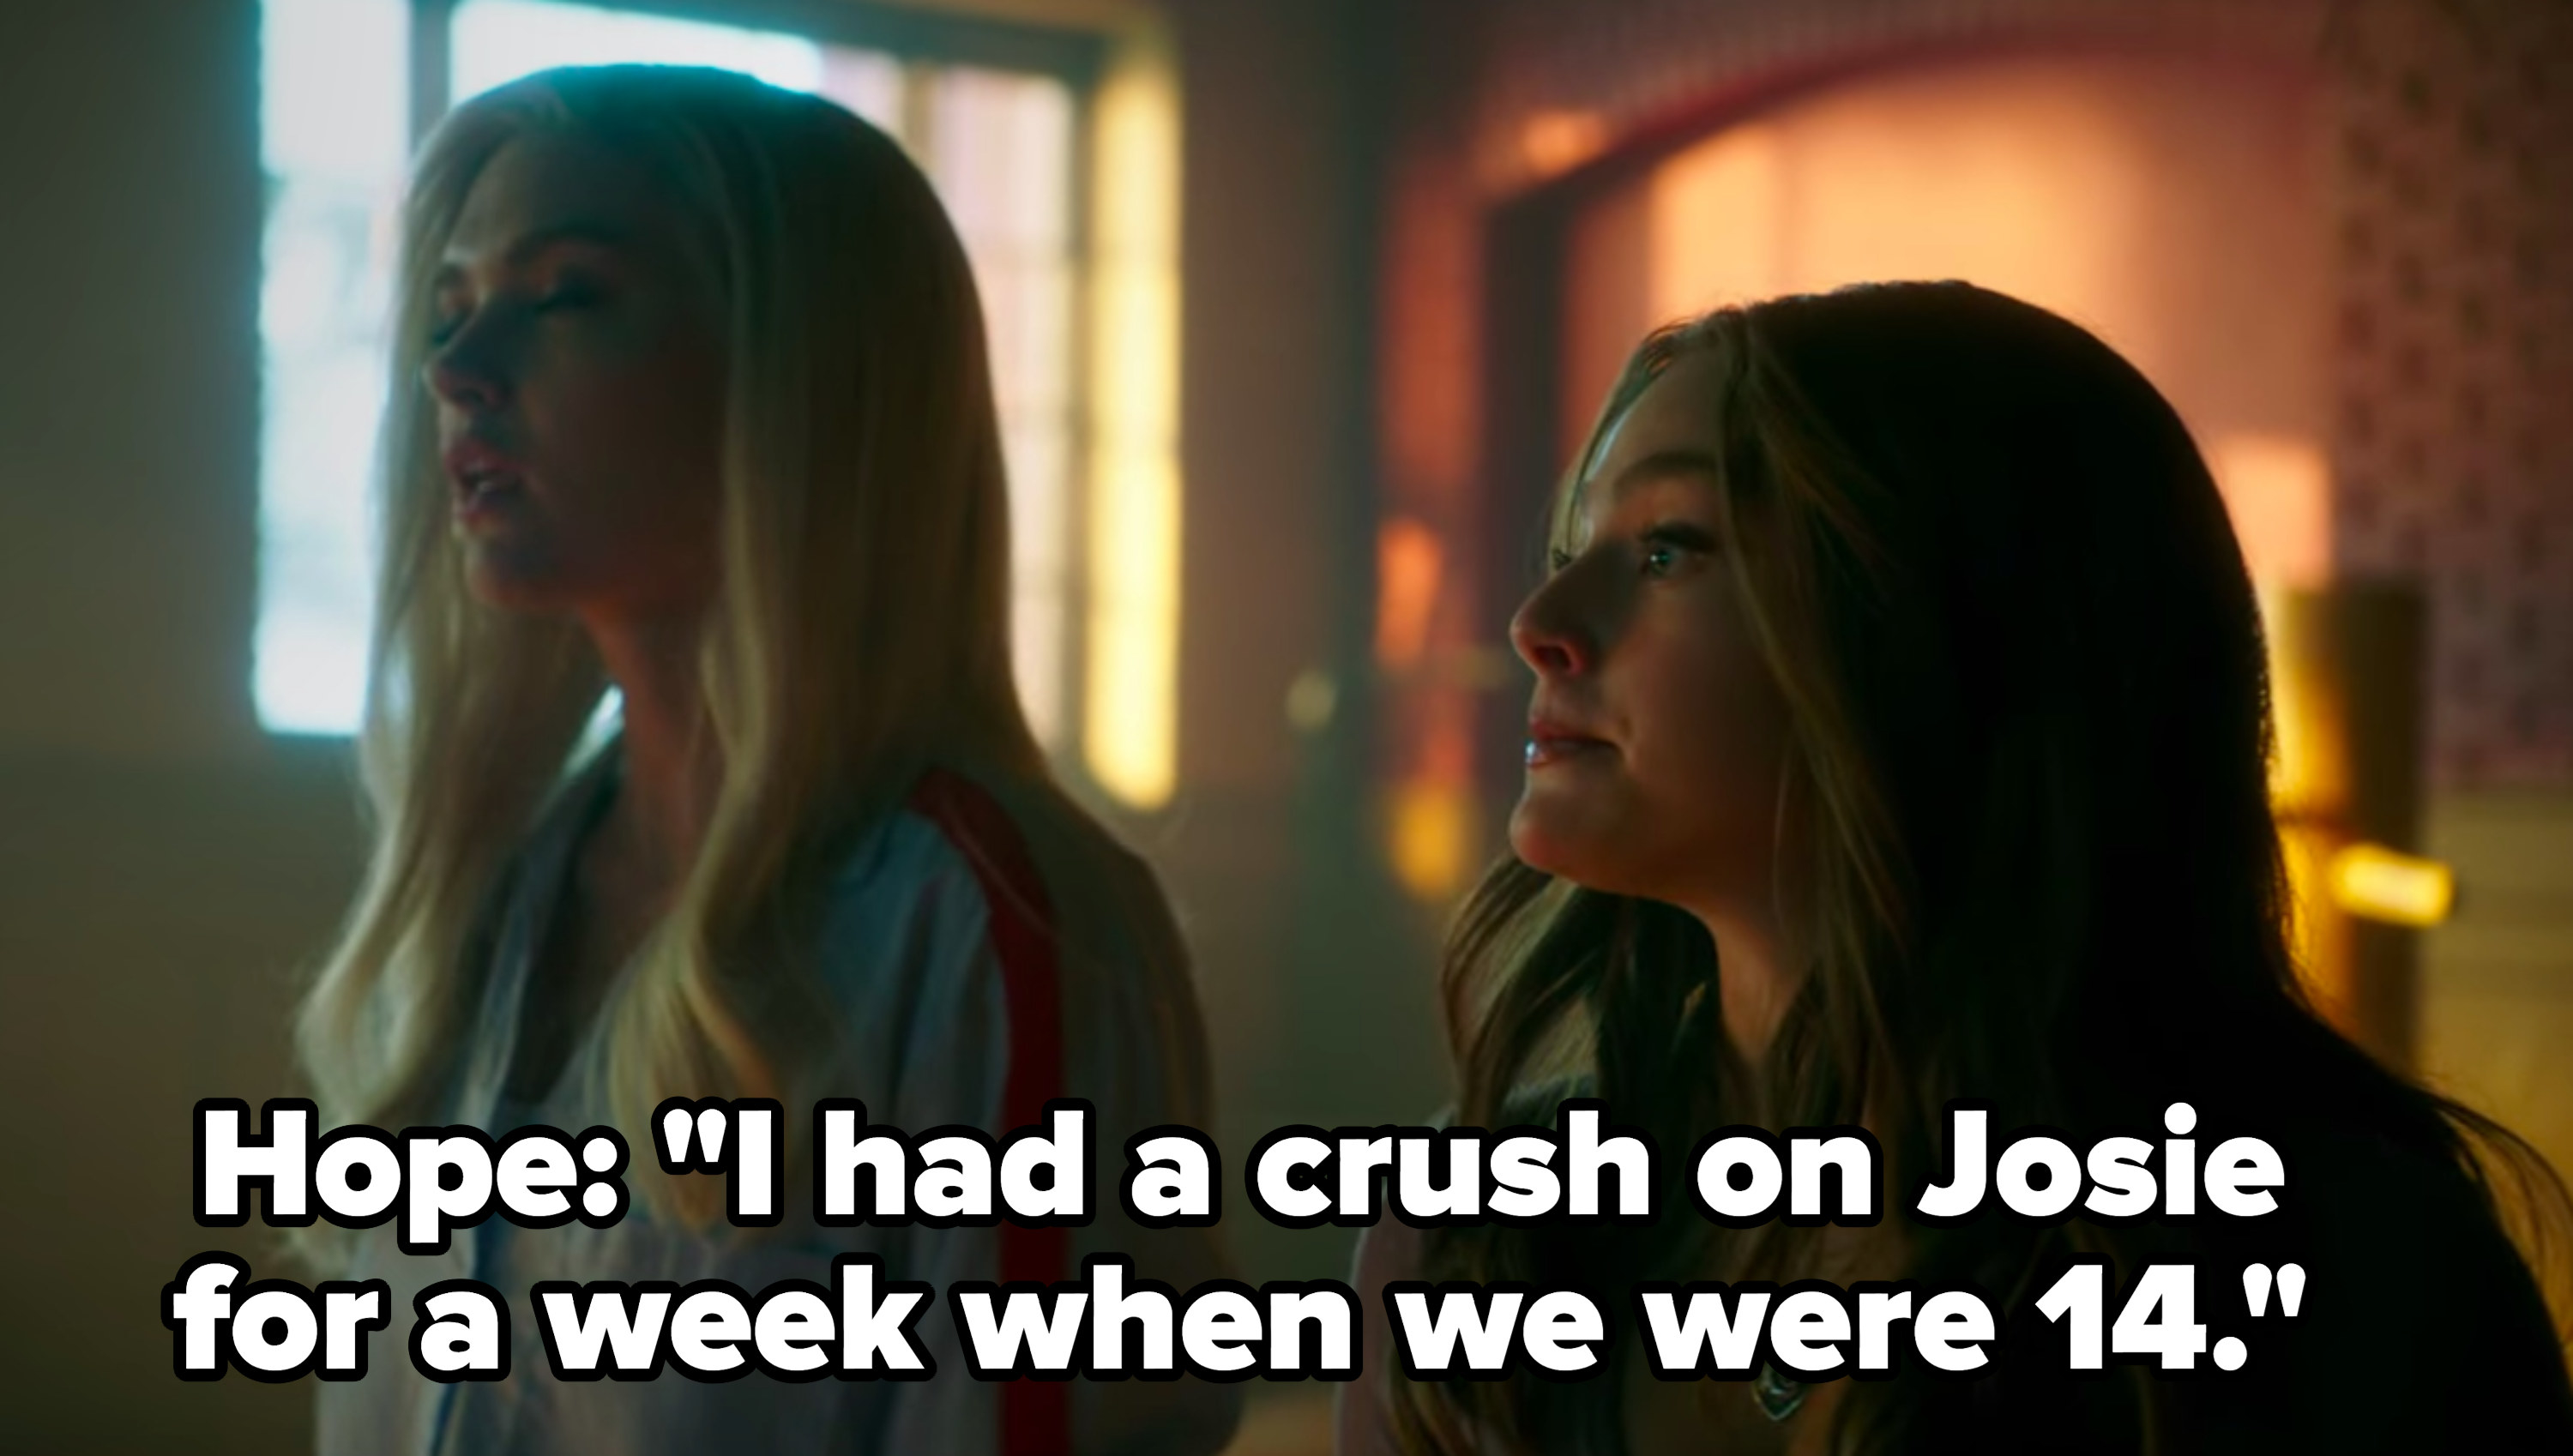 Hope says she had a crush on Josie for a week when they were all 14